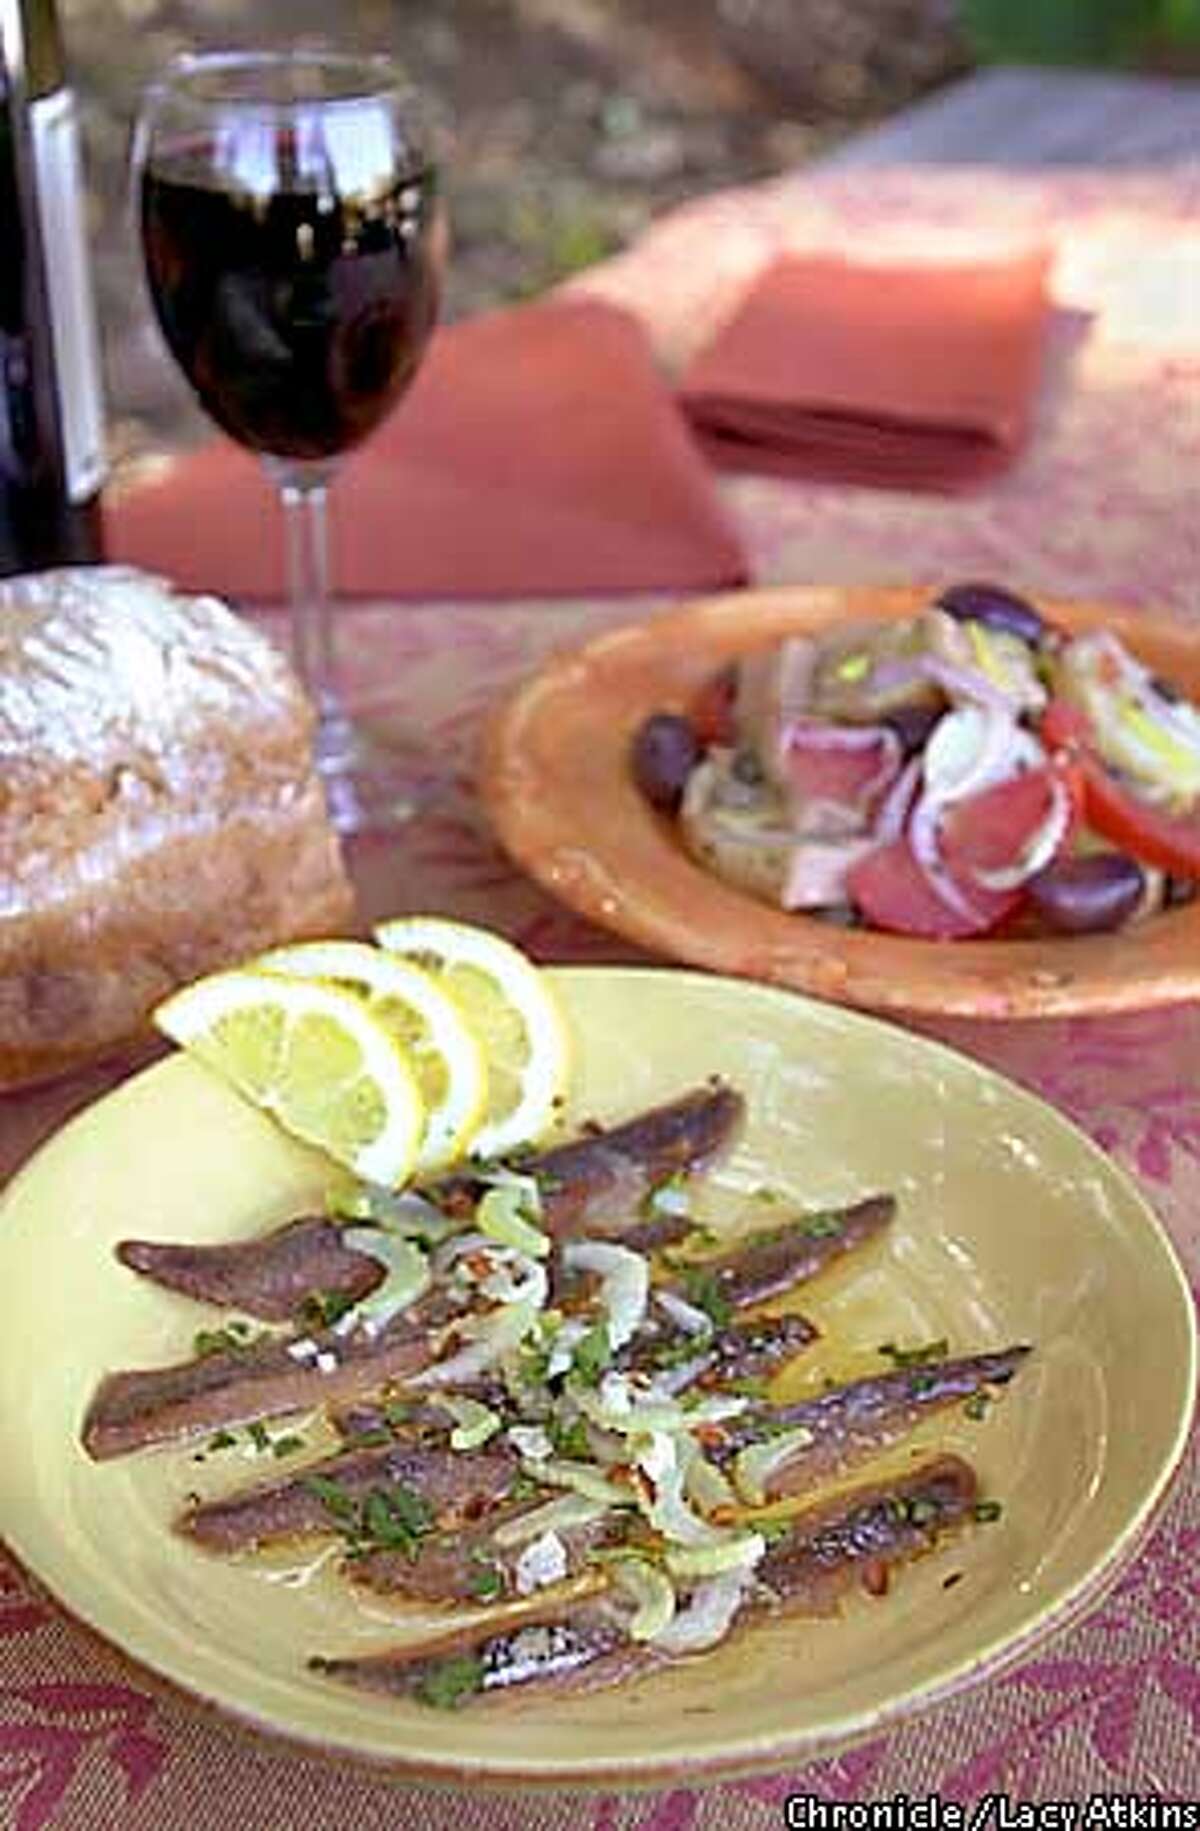 Marinated anchovies make refreshing additions to any outdoor menu. Chronicle photo by Lacy Atkins